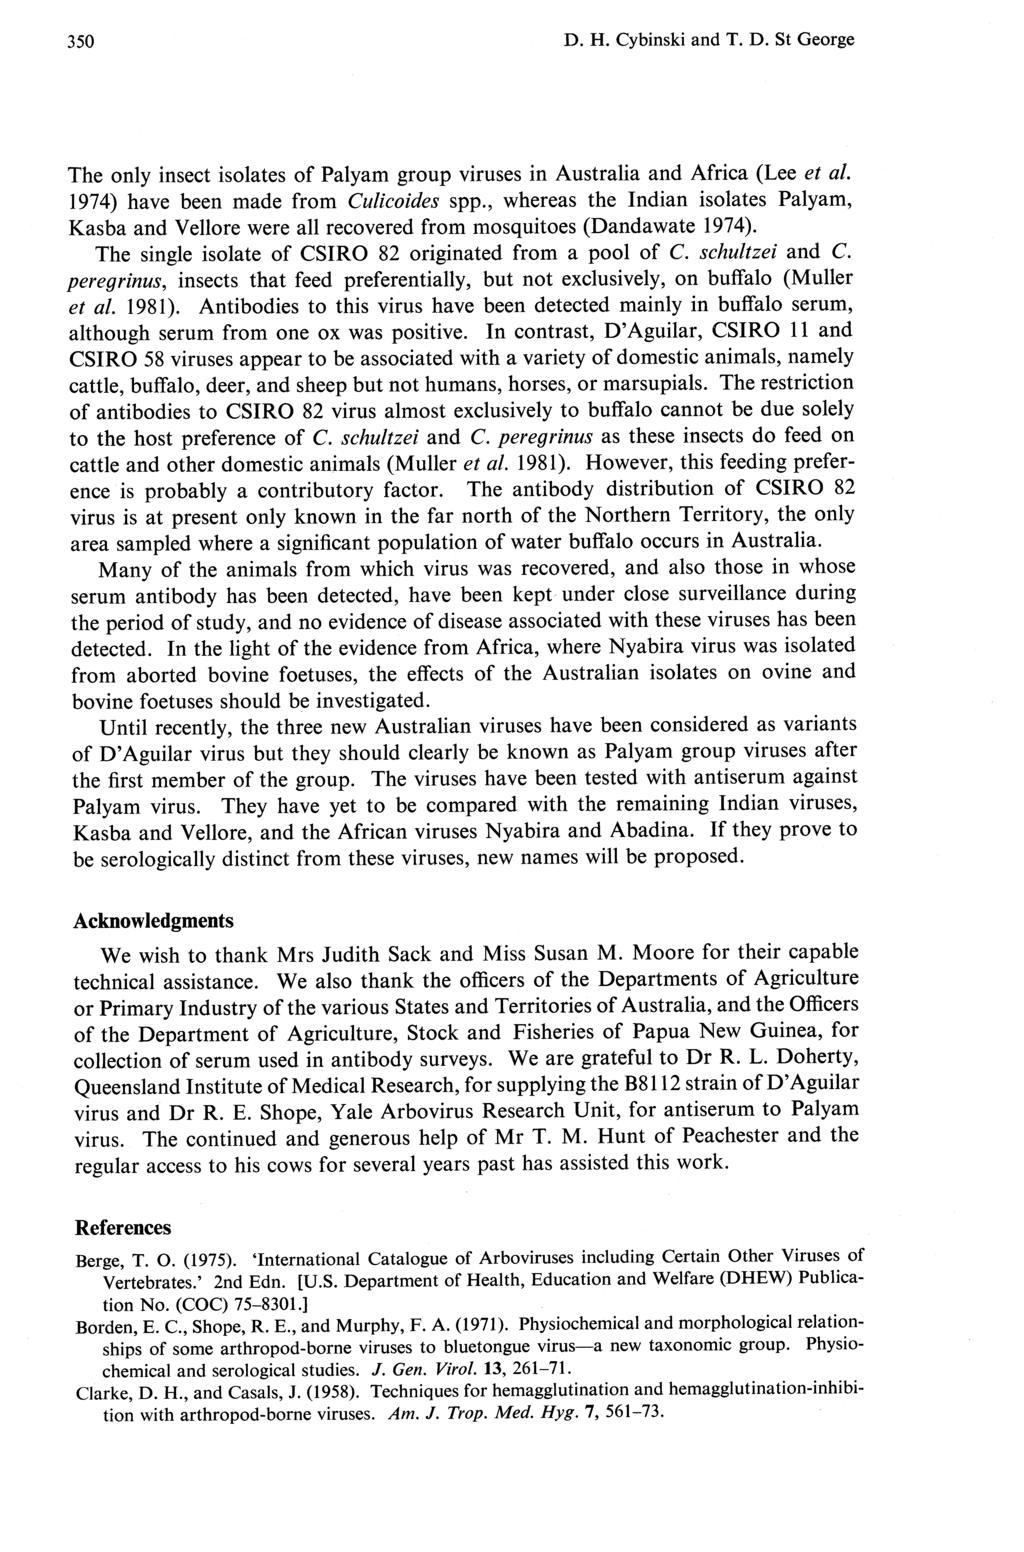 350 D. H. Cybinski and T. D. St George The only insect isolates of Palyam group viruses in Australia and Africa (Lee et al. 1974) have been made from Culicoides spp.